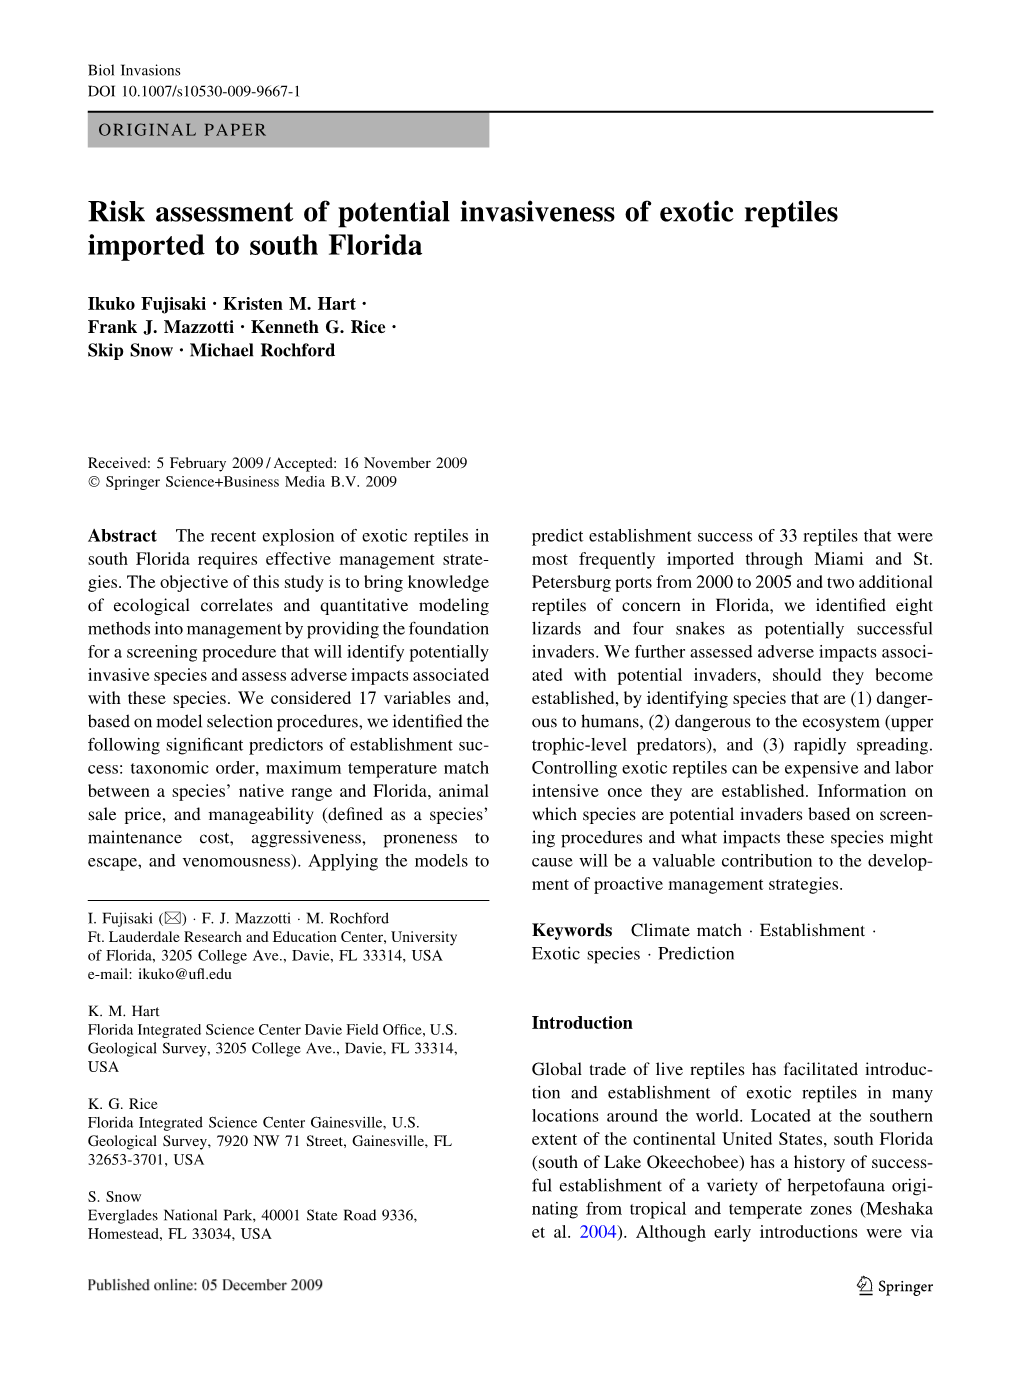 Risk Assessment of Potential Invasiveness of Exotic Reptiles Imported to South Florida